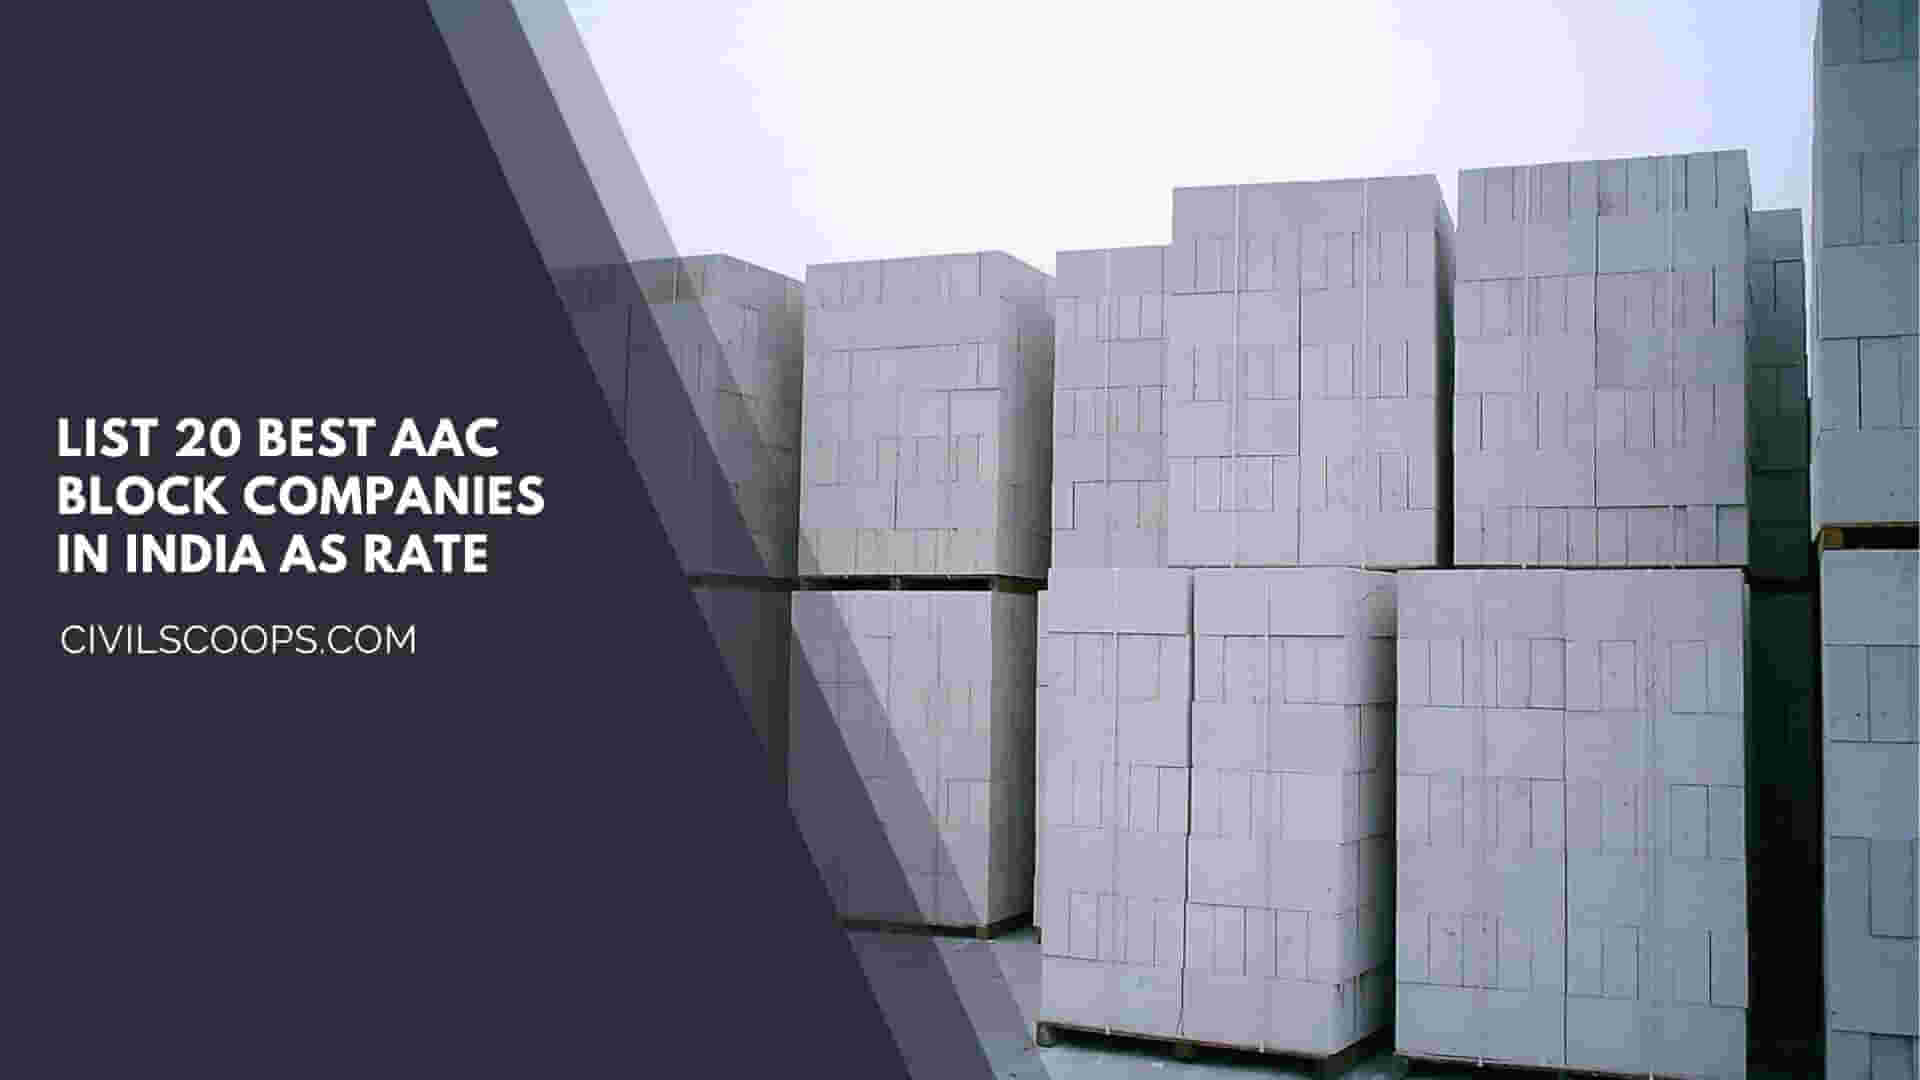 List 20 Best AAC Block Companies in India as Rate